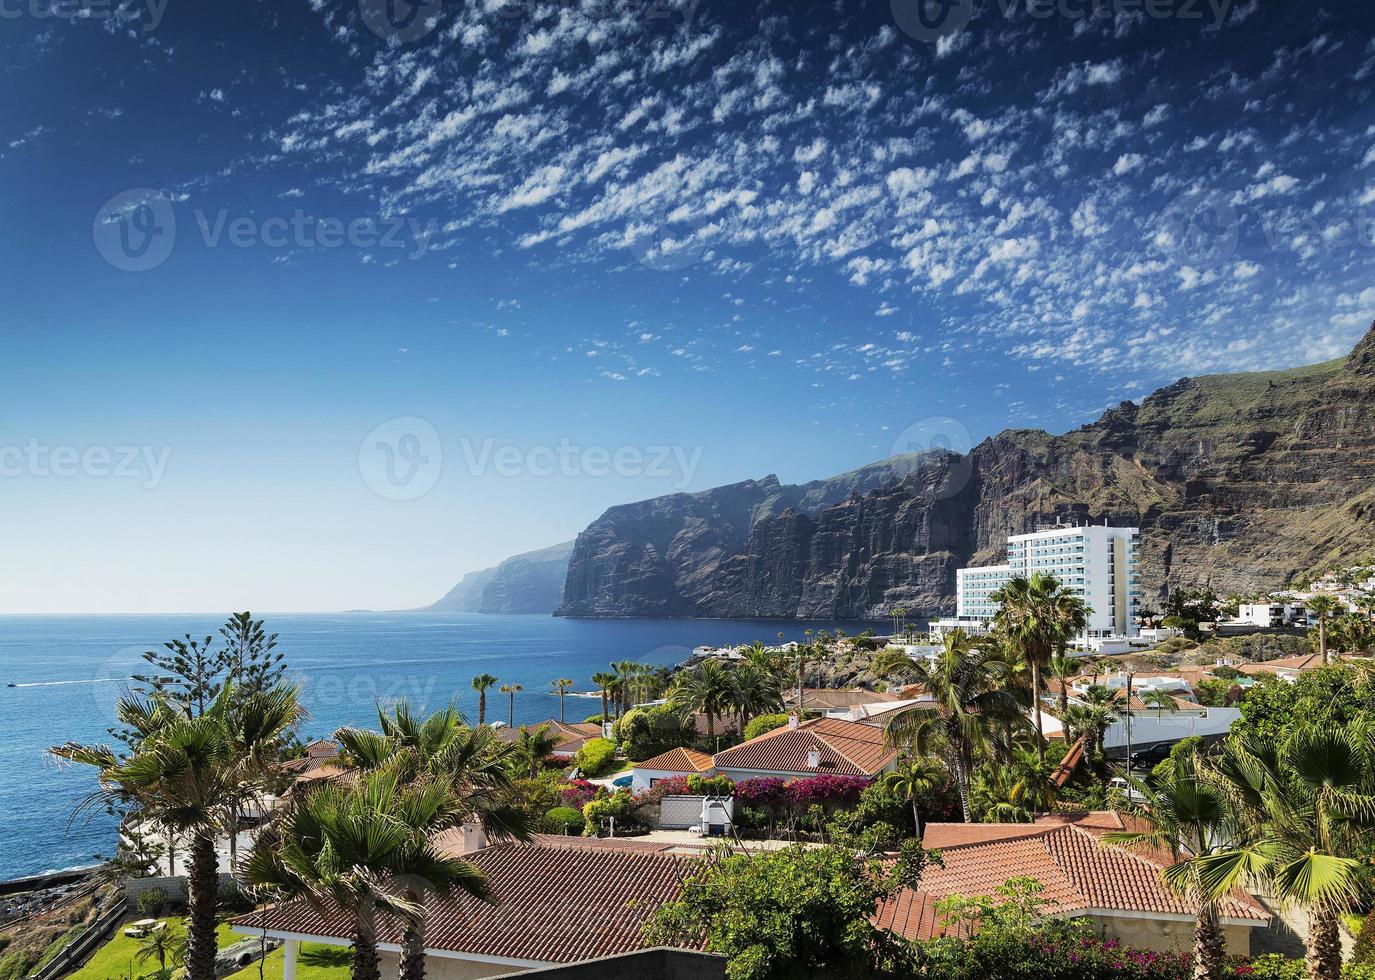 Los Gigantes cliffs nature landmark and resorts in South Tenerife island Spain photo